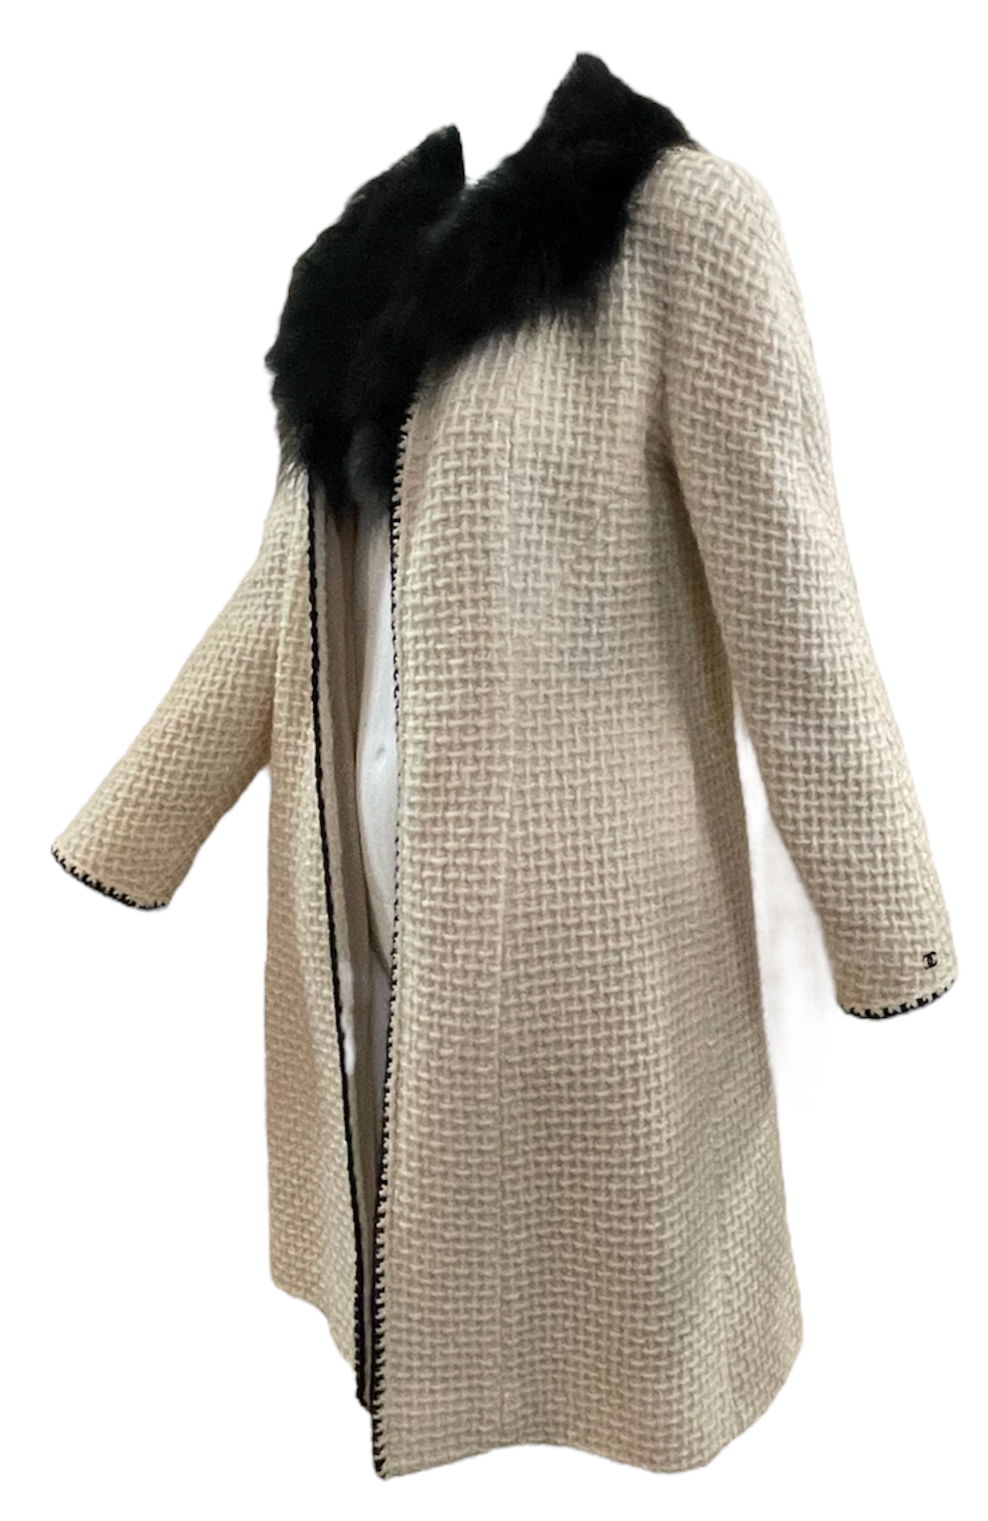 Chanel White Wool Coat with Feathered Collar – THE WAY WE WORE